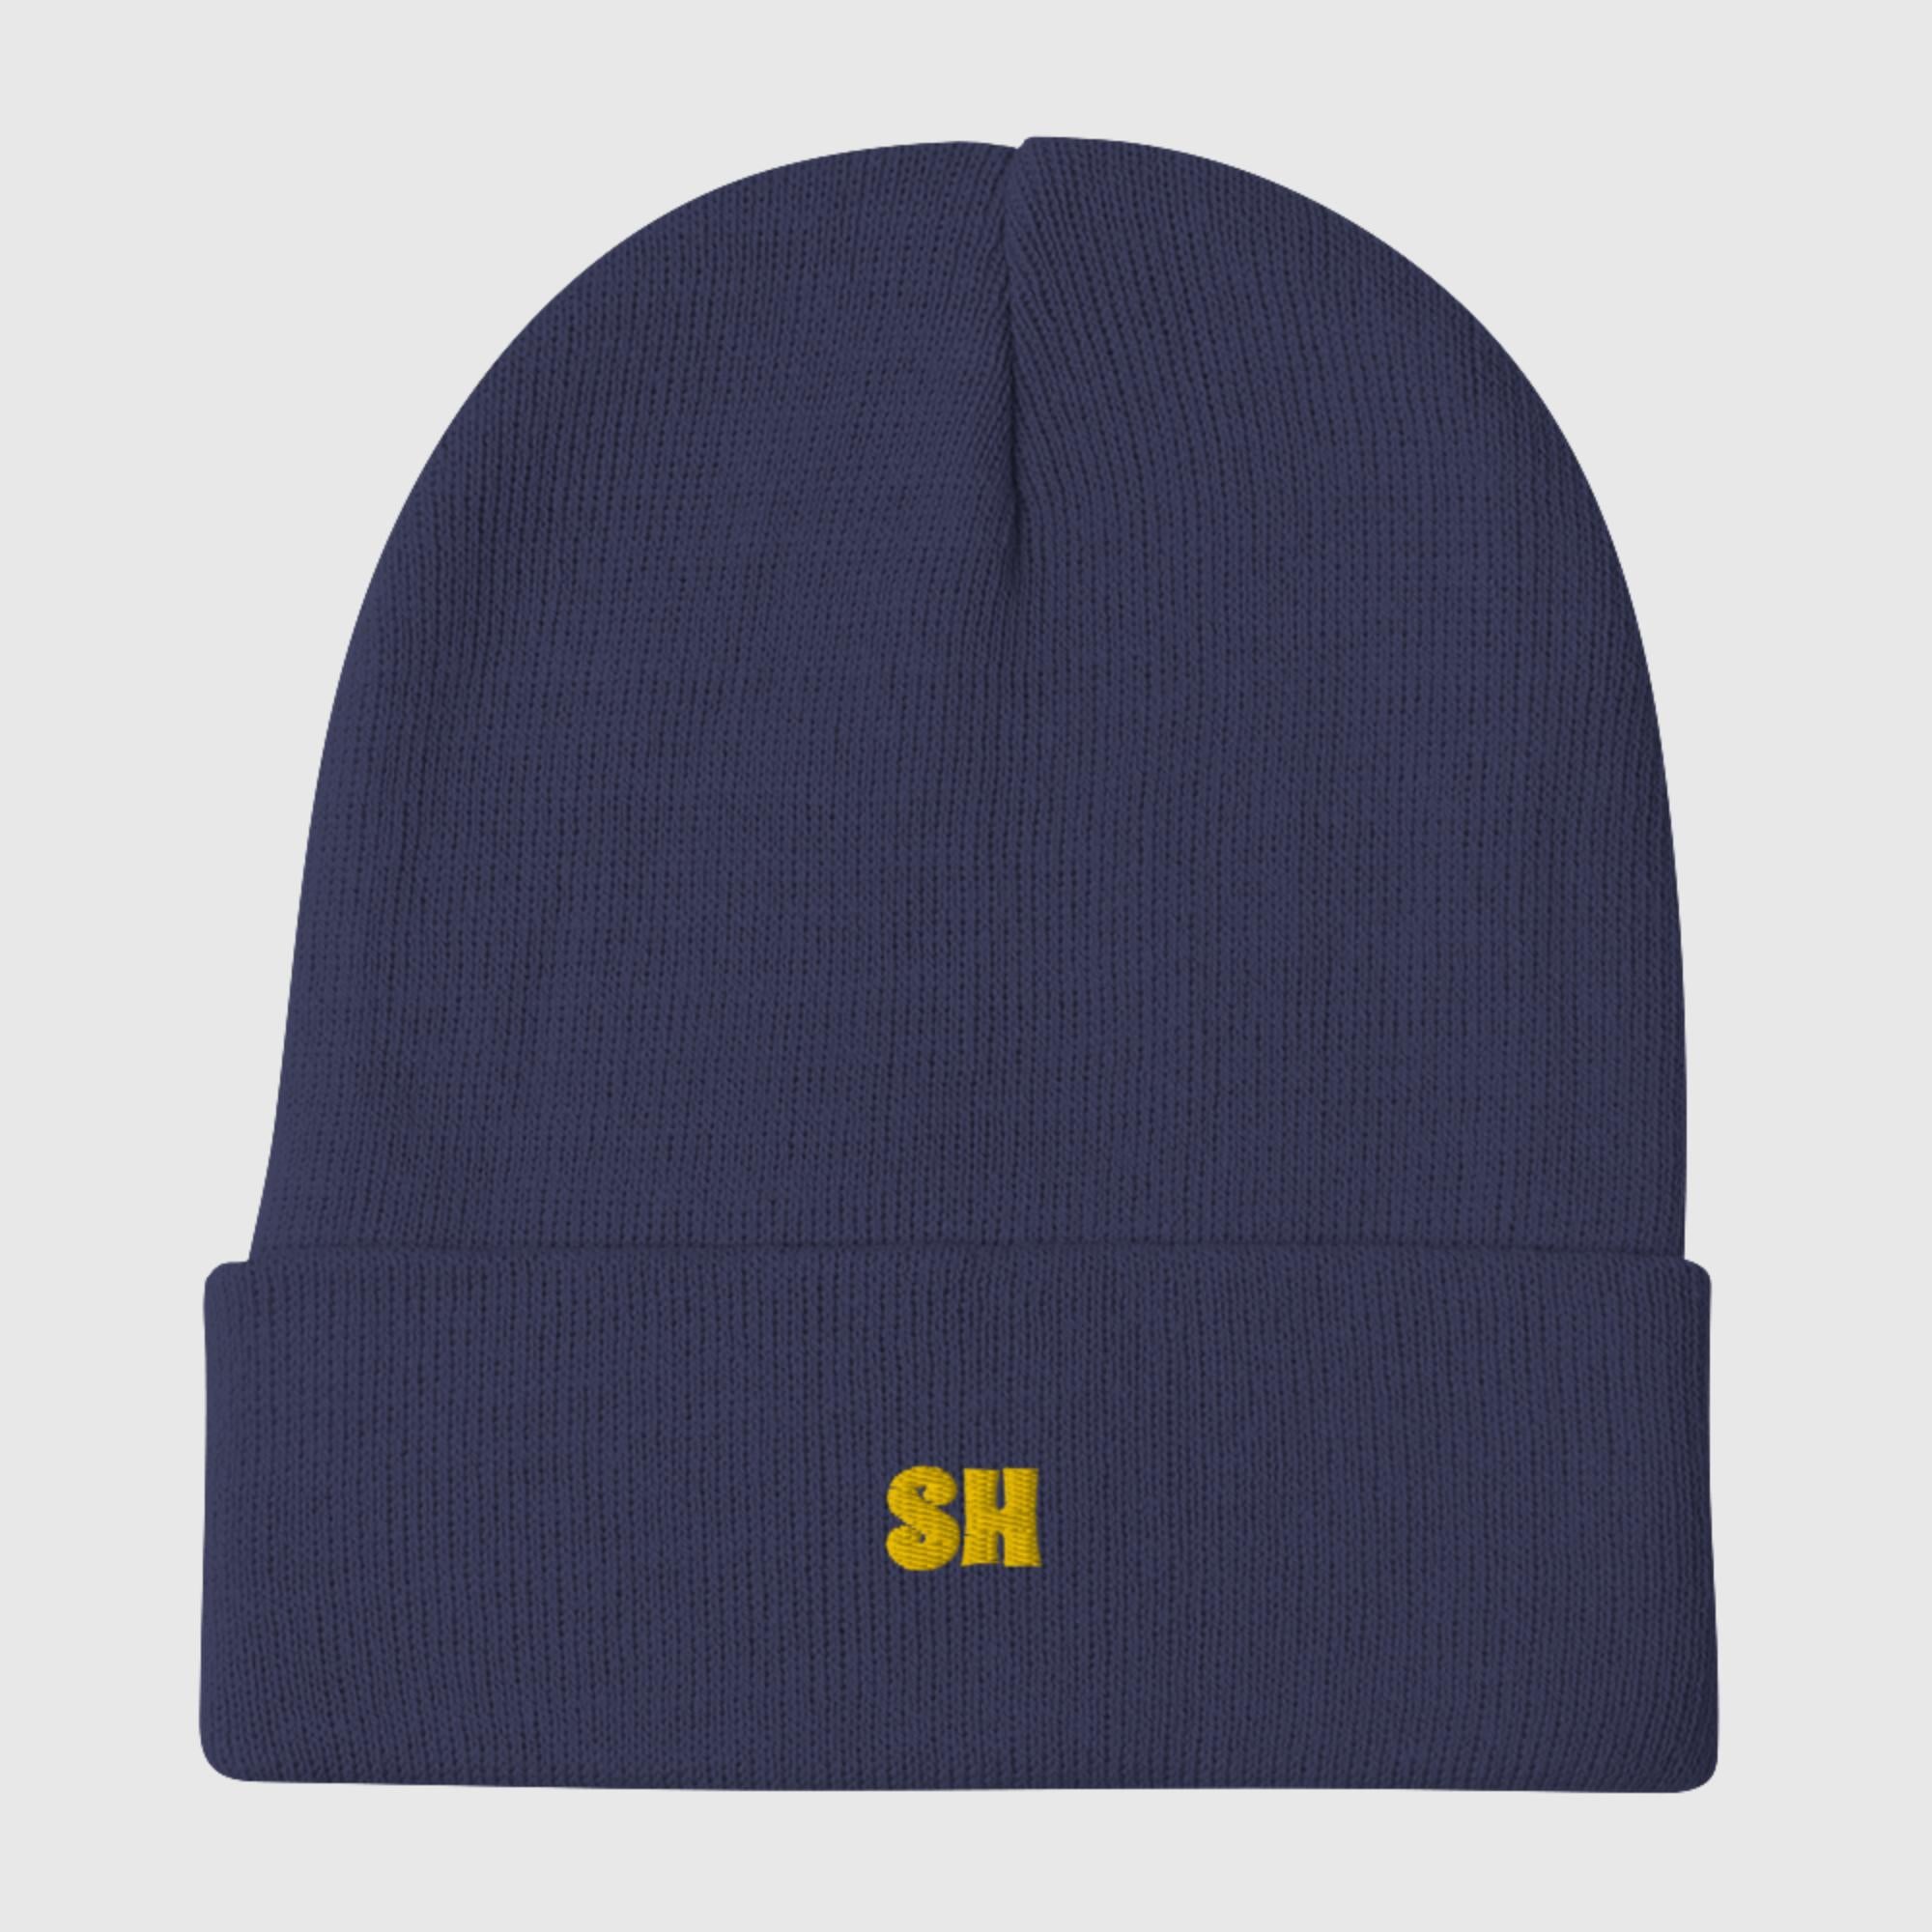 Embroidered Beanie - Sunset Harbor Clothing